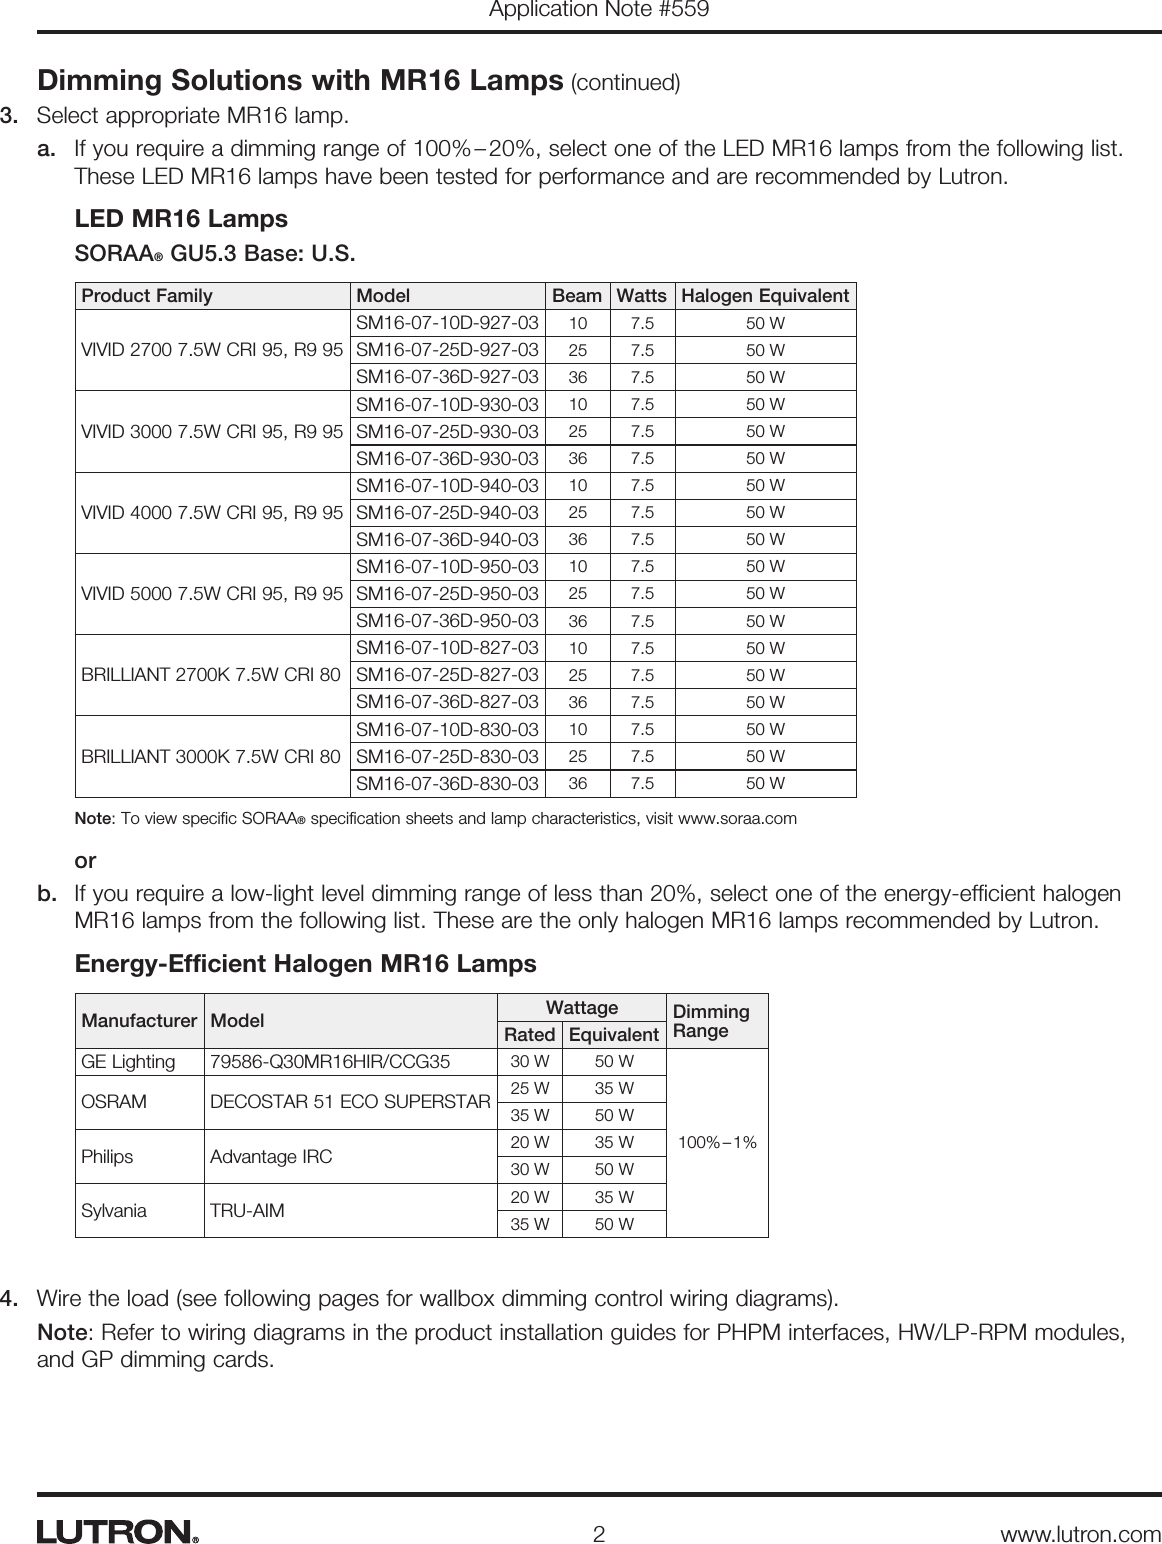 Page 2 of 4 - Dimming Low-Voltage LED MR16 Lamps APP NOTE 559  150136-Catalog